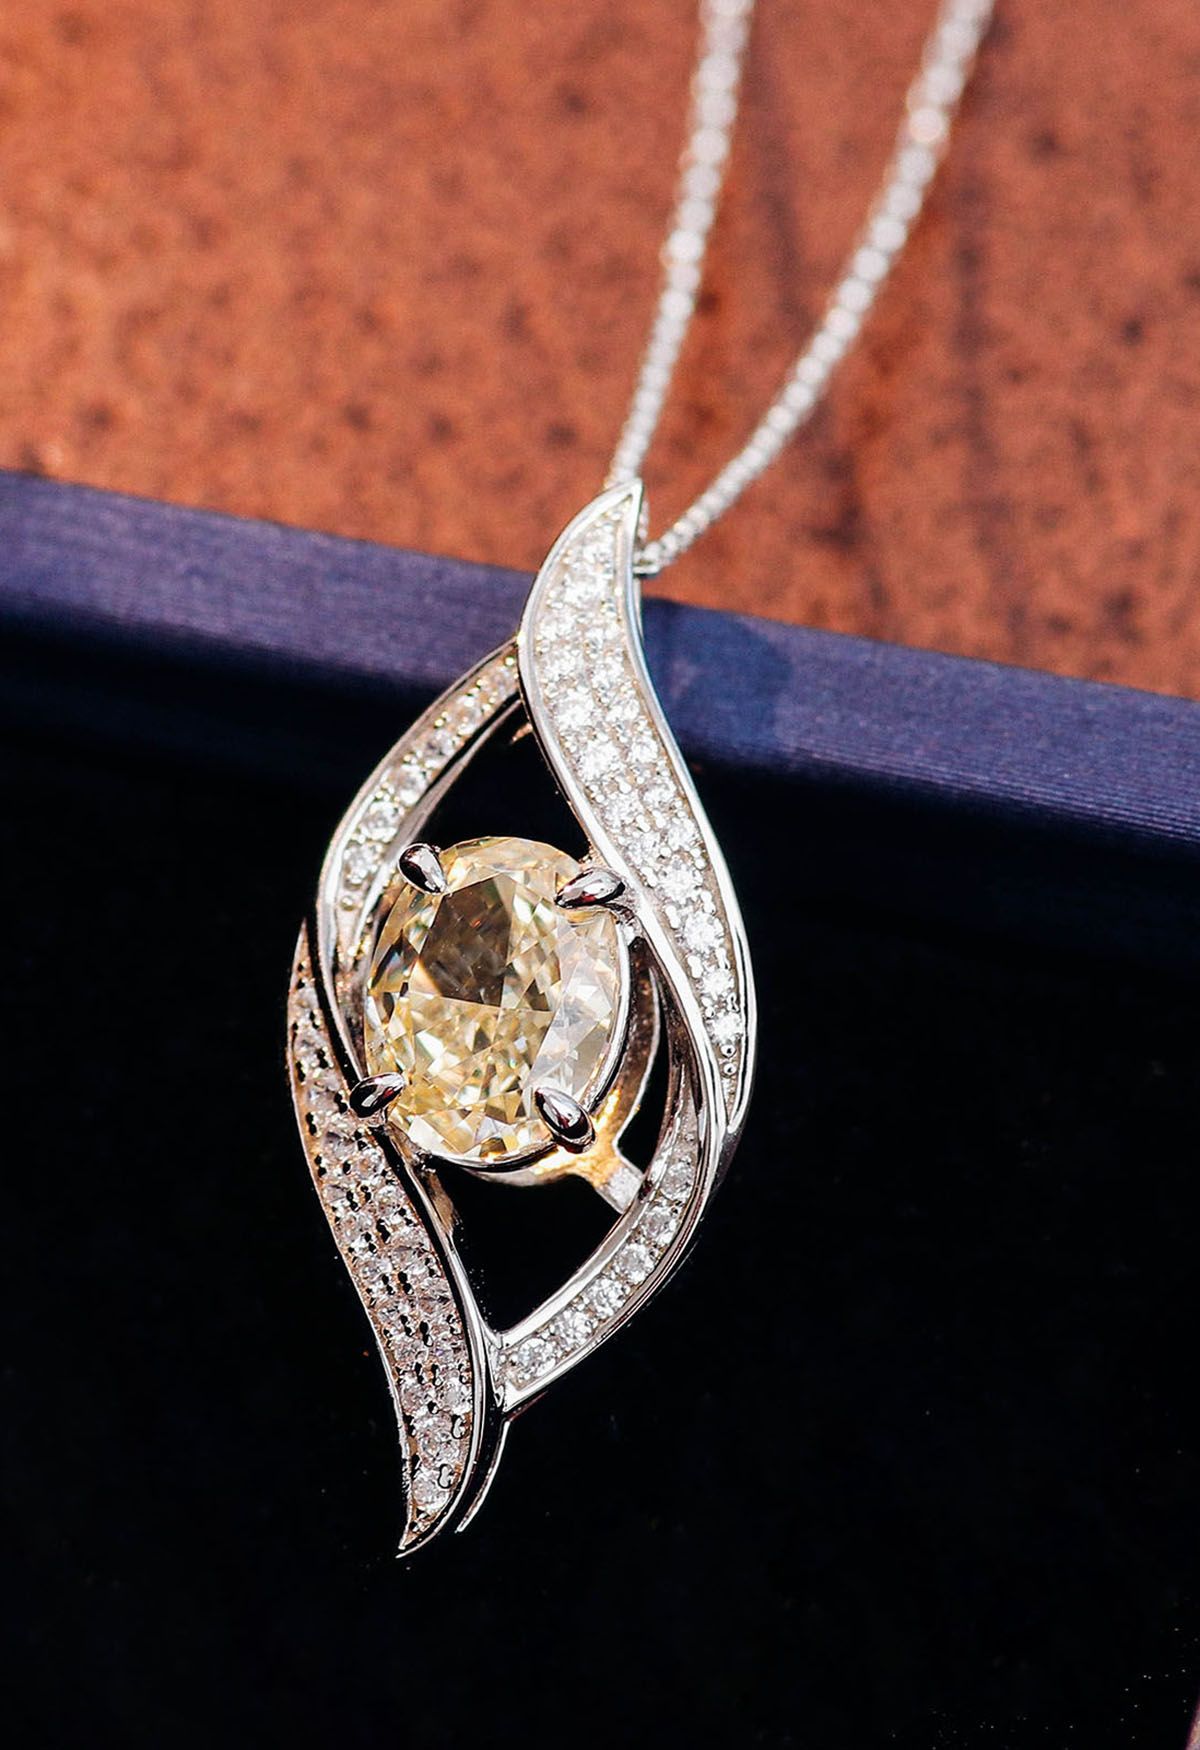 Hollow Leaf Shape Yellow Crystal Cubic Zirconia Necklace